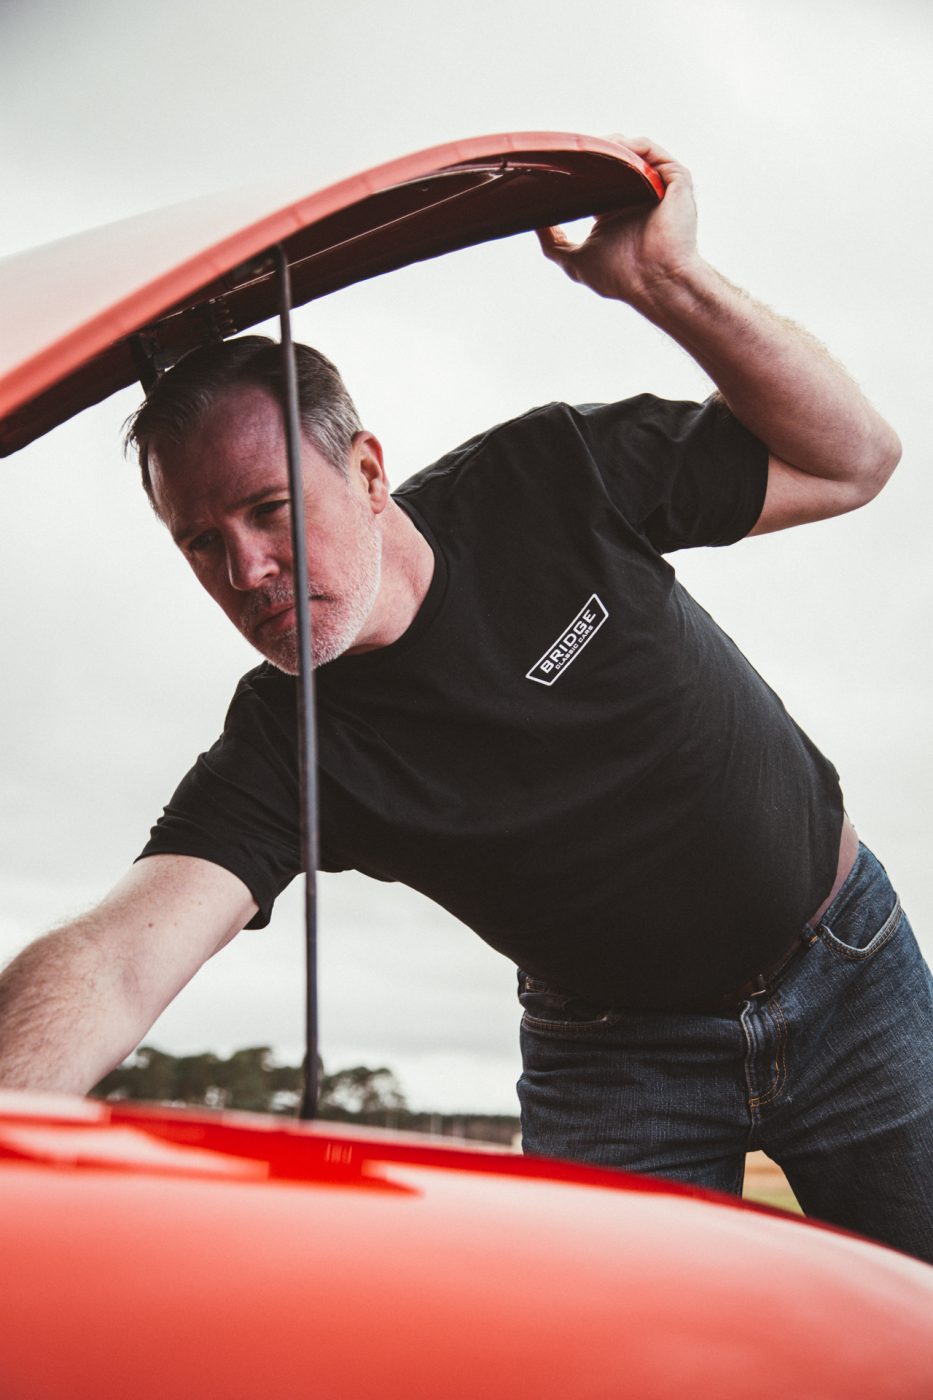 Black Bridge Classic Cars workshop T-Shirt 'The Standard' be part of our classic car workshop team around the world!